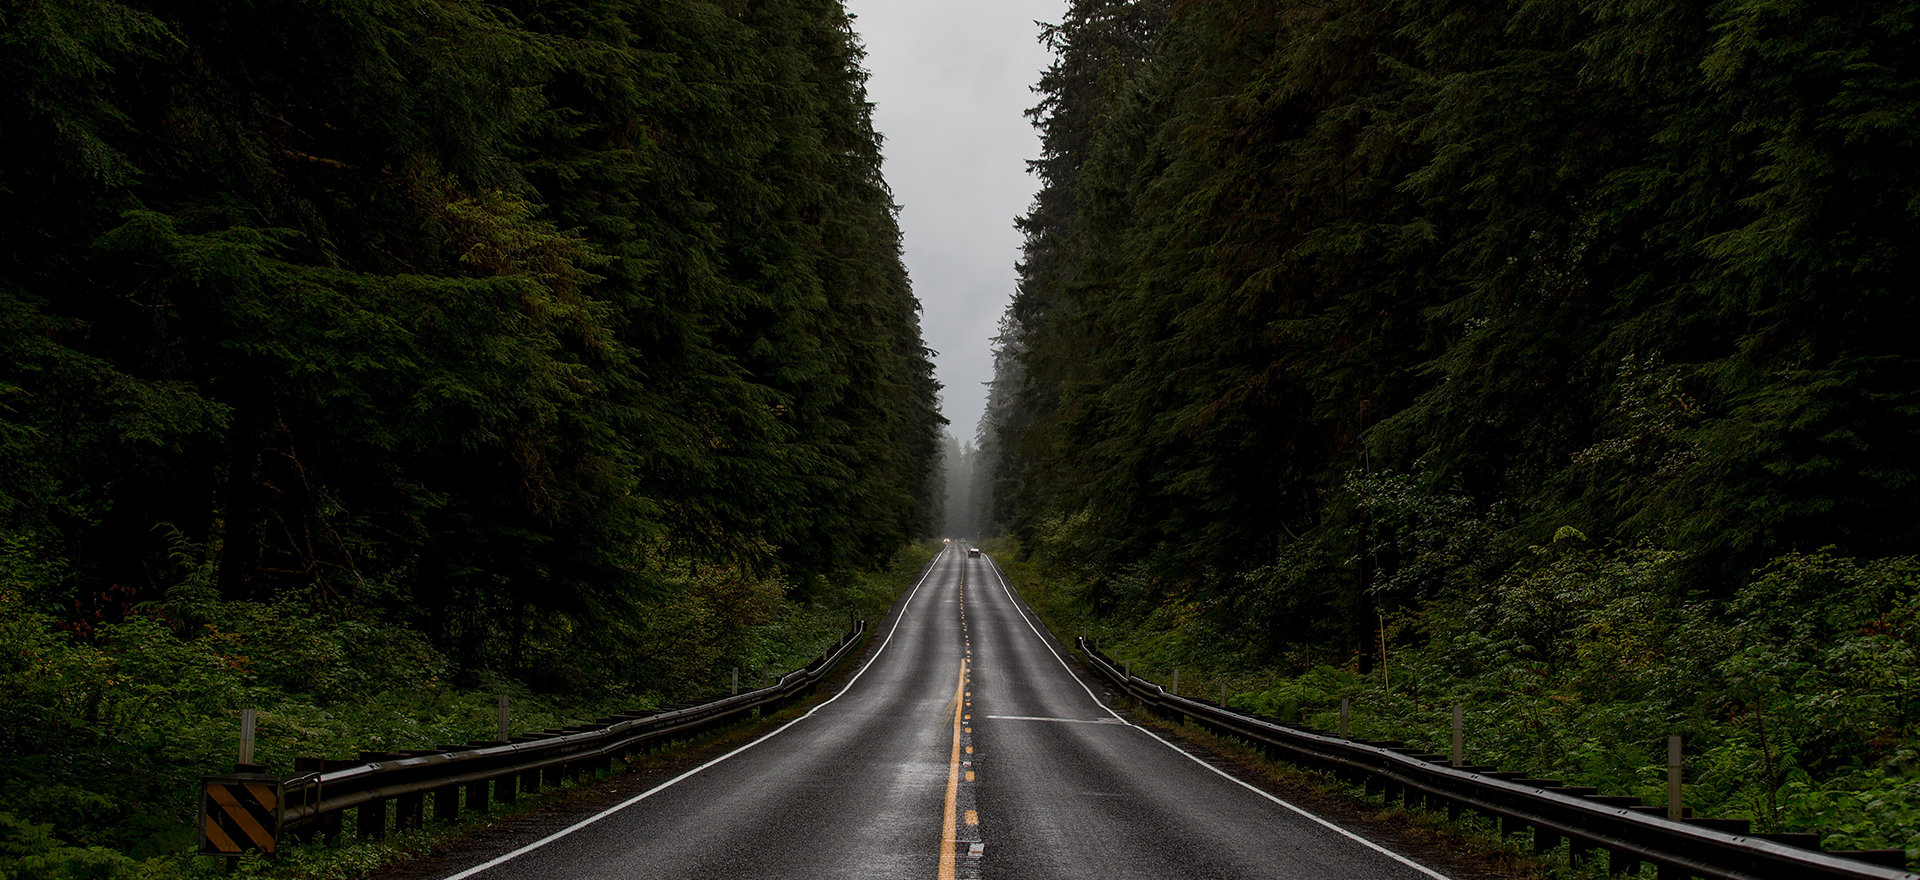 Dark, moody image. A grey road between dark green pine trees with an overcast sky.